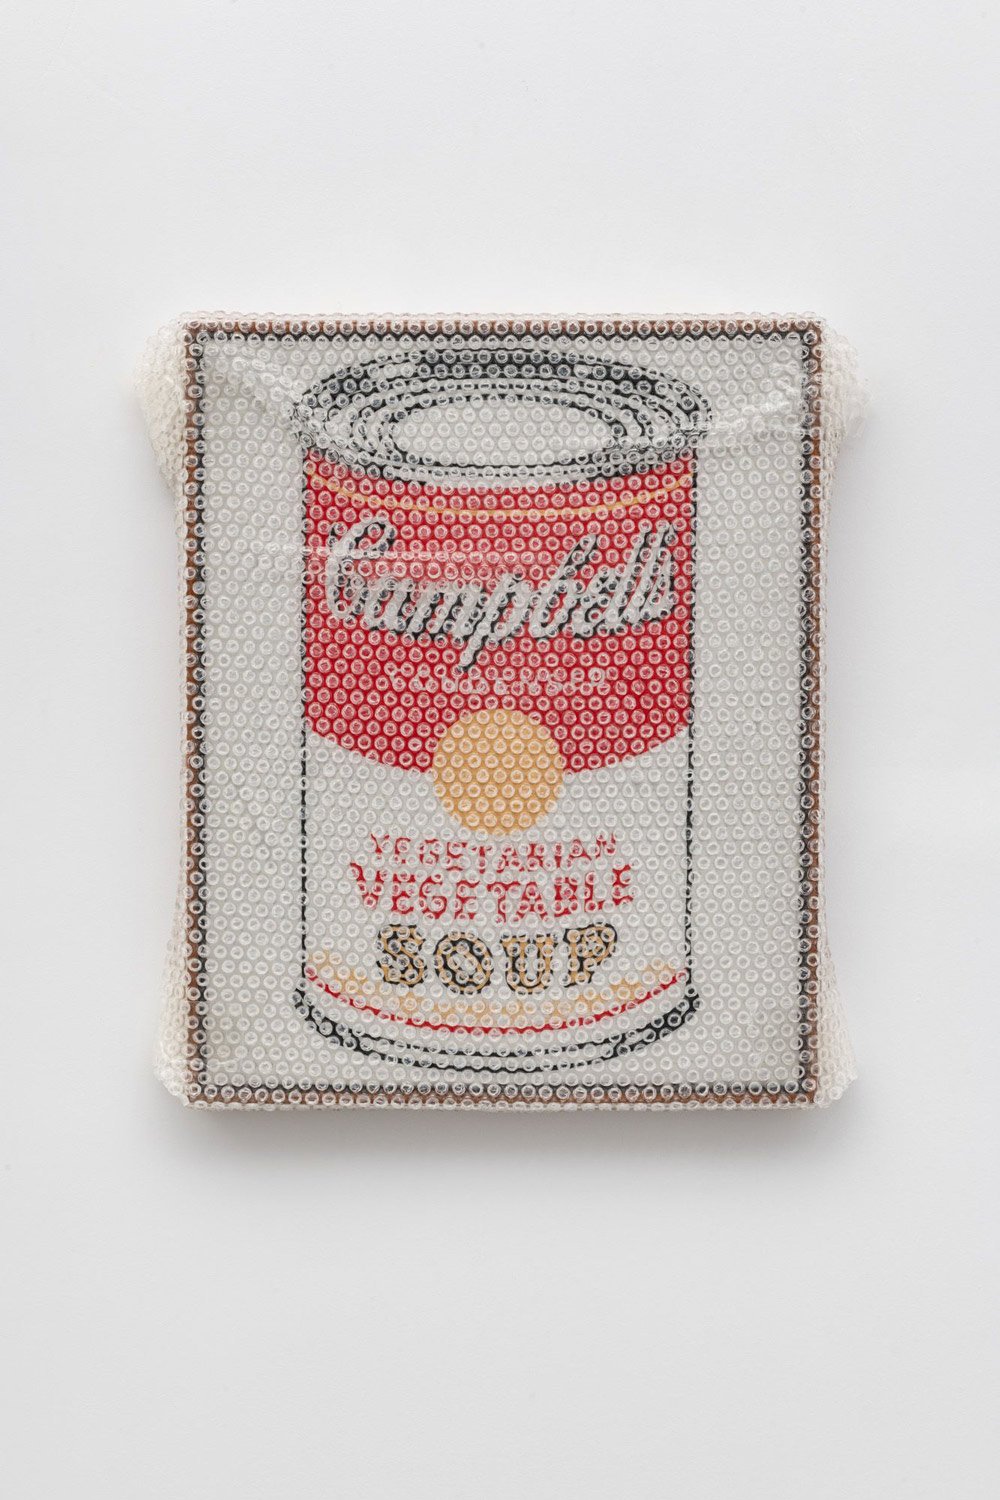   Tammi Campbell  -  Campbell's Soup Can (Vegetarian Vegetable) with Bubble Wrap and Packing Tape , 2022   Acrylique sur toile avec cadre en bois / Acrylic on canvas with wood frame 22 1/8 x 18 in.  